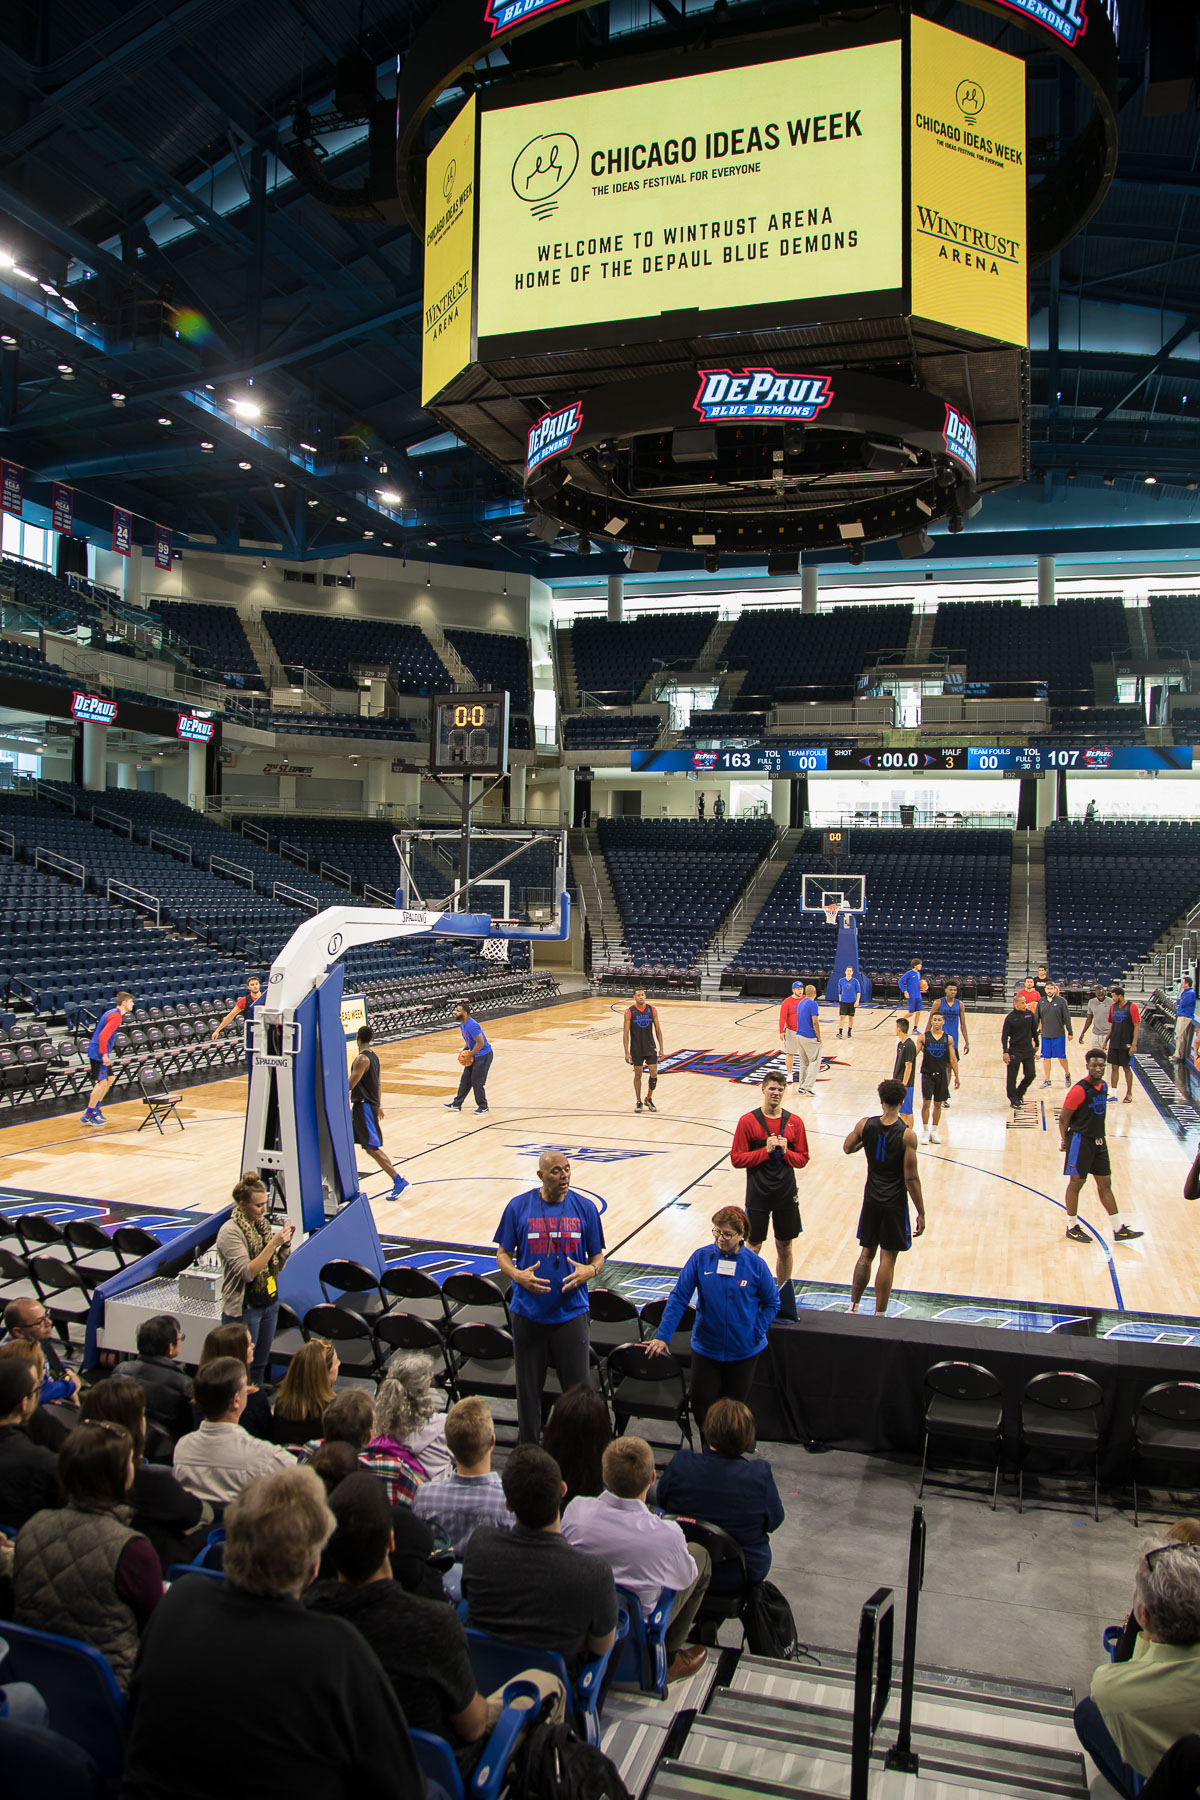 Dave Leitao, men's basketball head coach, talks about the impact the new arena will have on DePaul basketball in the future. (DePaul University/Jeff Carrion)